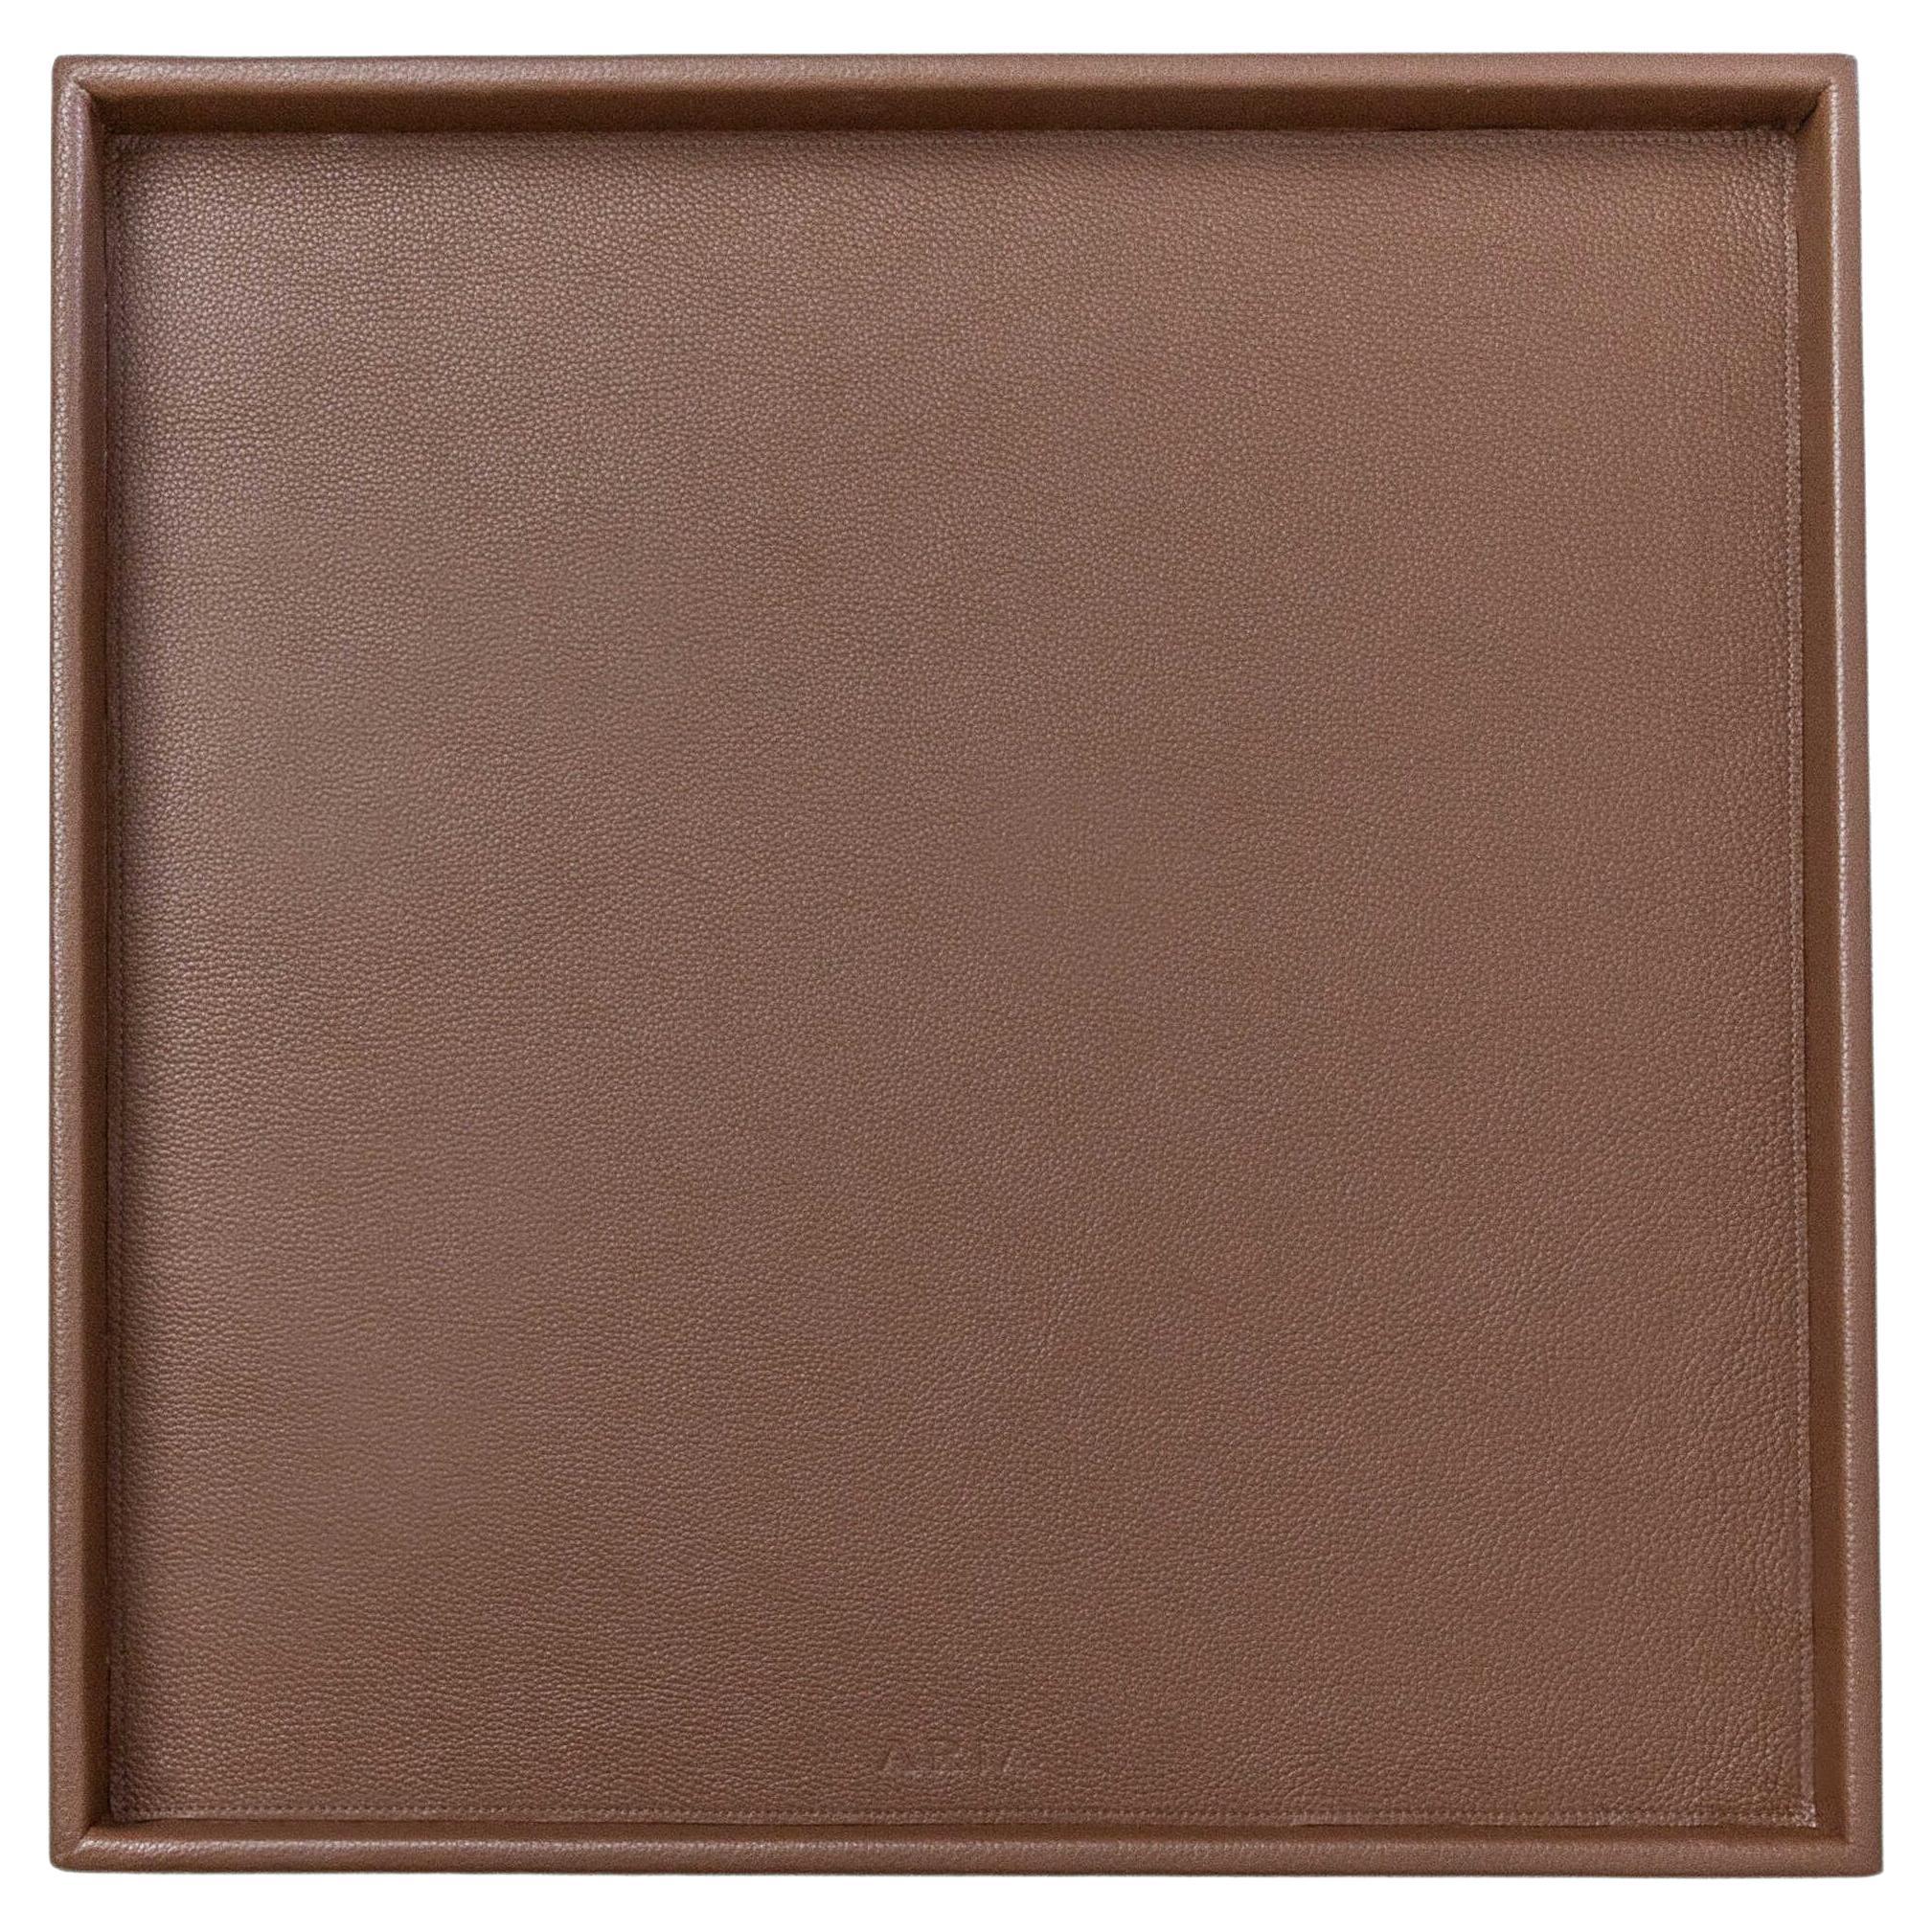 Modern Leather Tray, Large B Square Tray, Handmade in Brazil - Color: Caramel For Sale